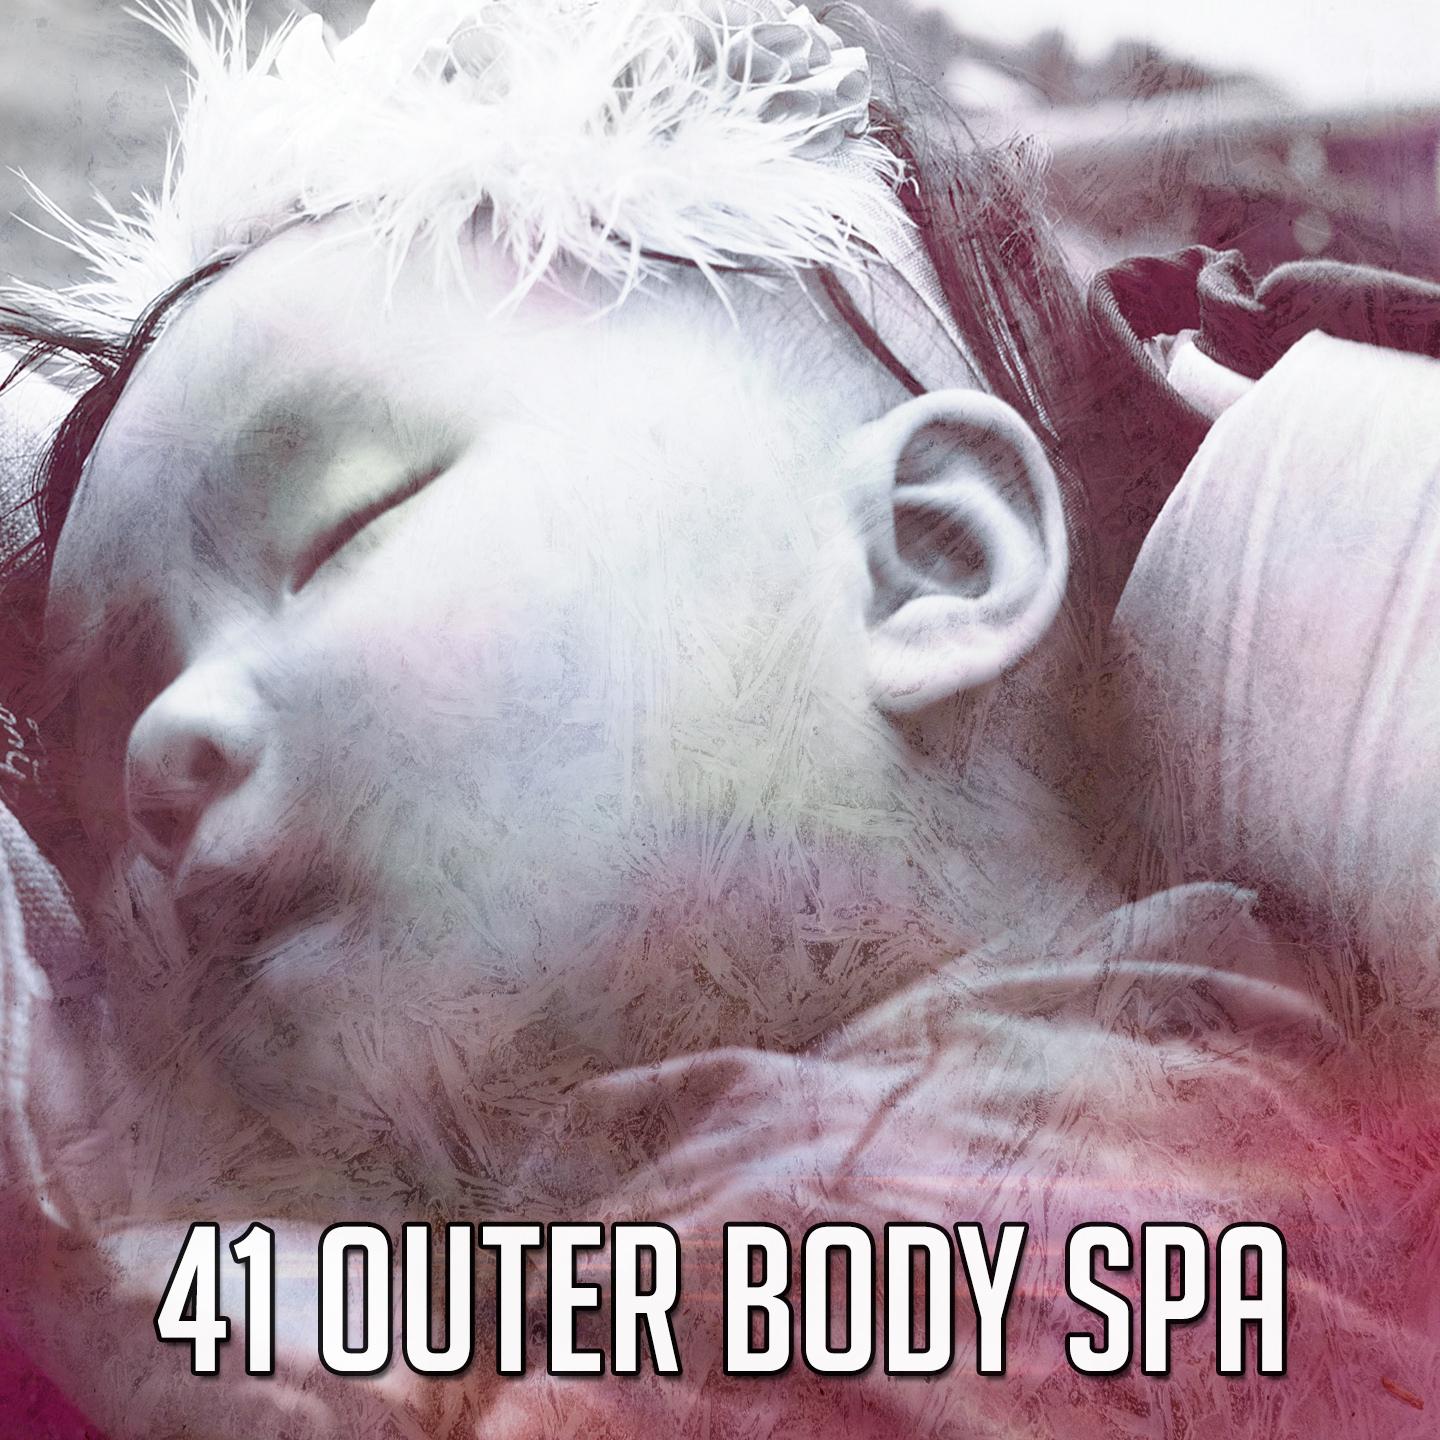 41 Outer Body Spa